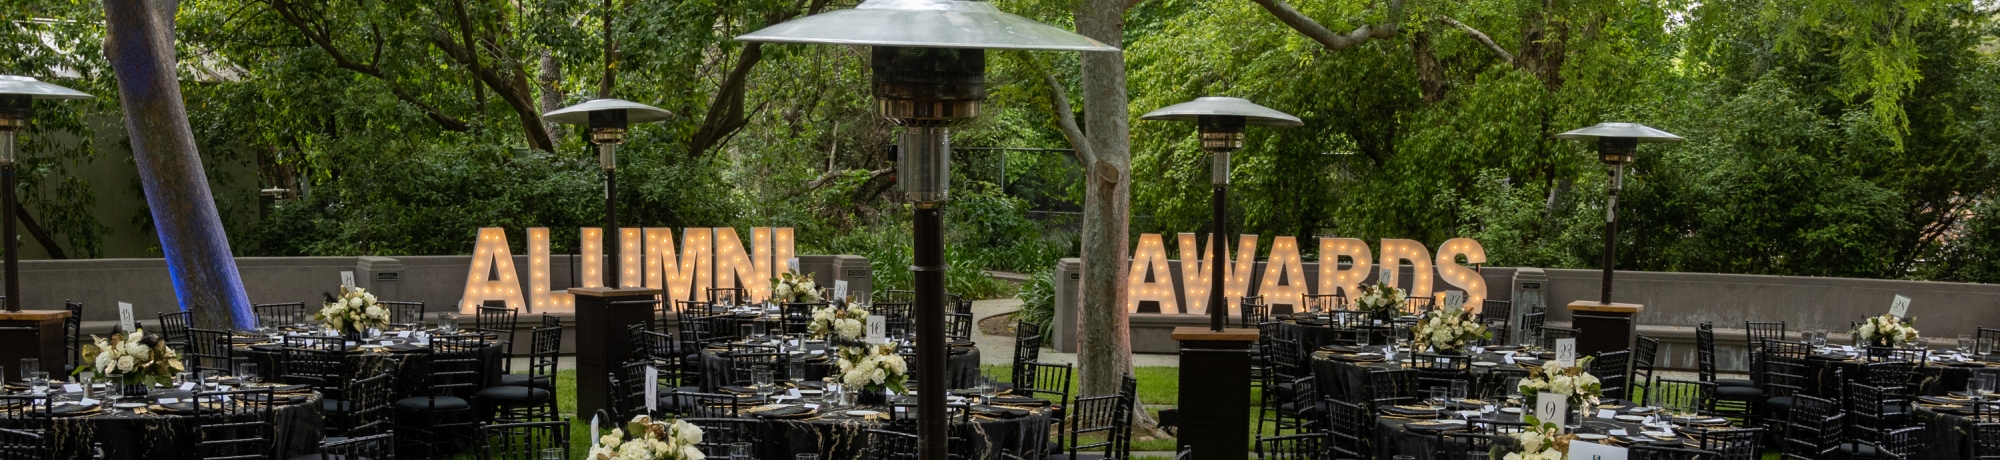 Round banquet tables on the grass with two marquee signs lit up that spell out the words "Alumni Awards"